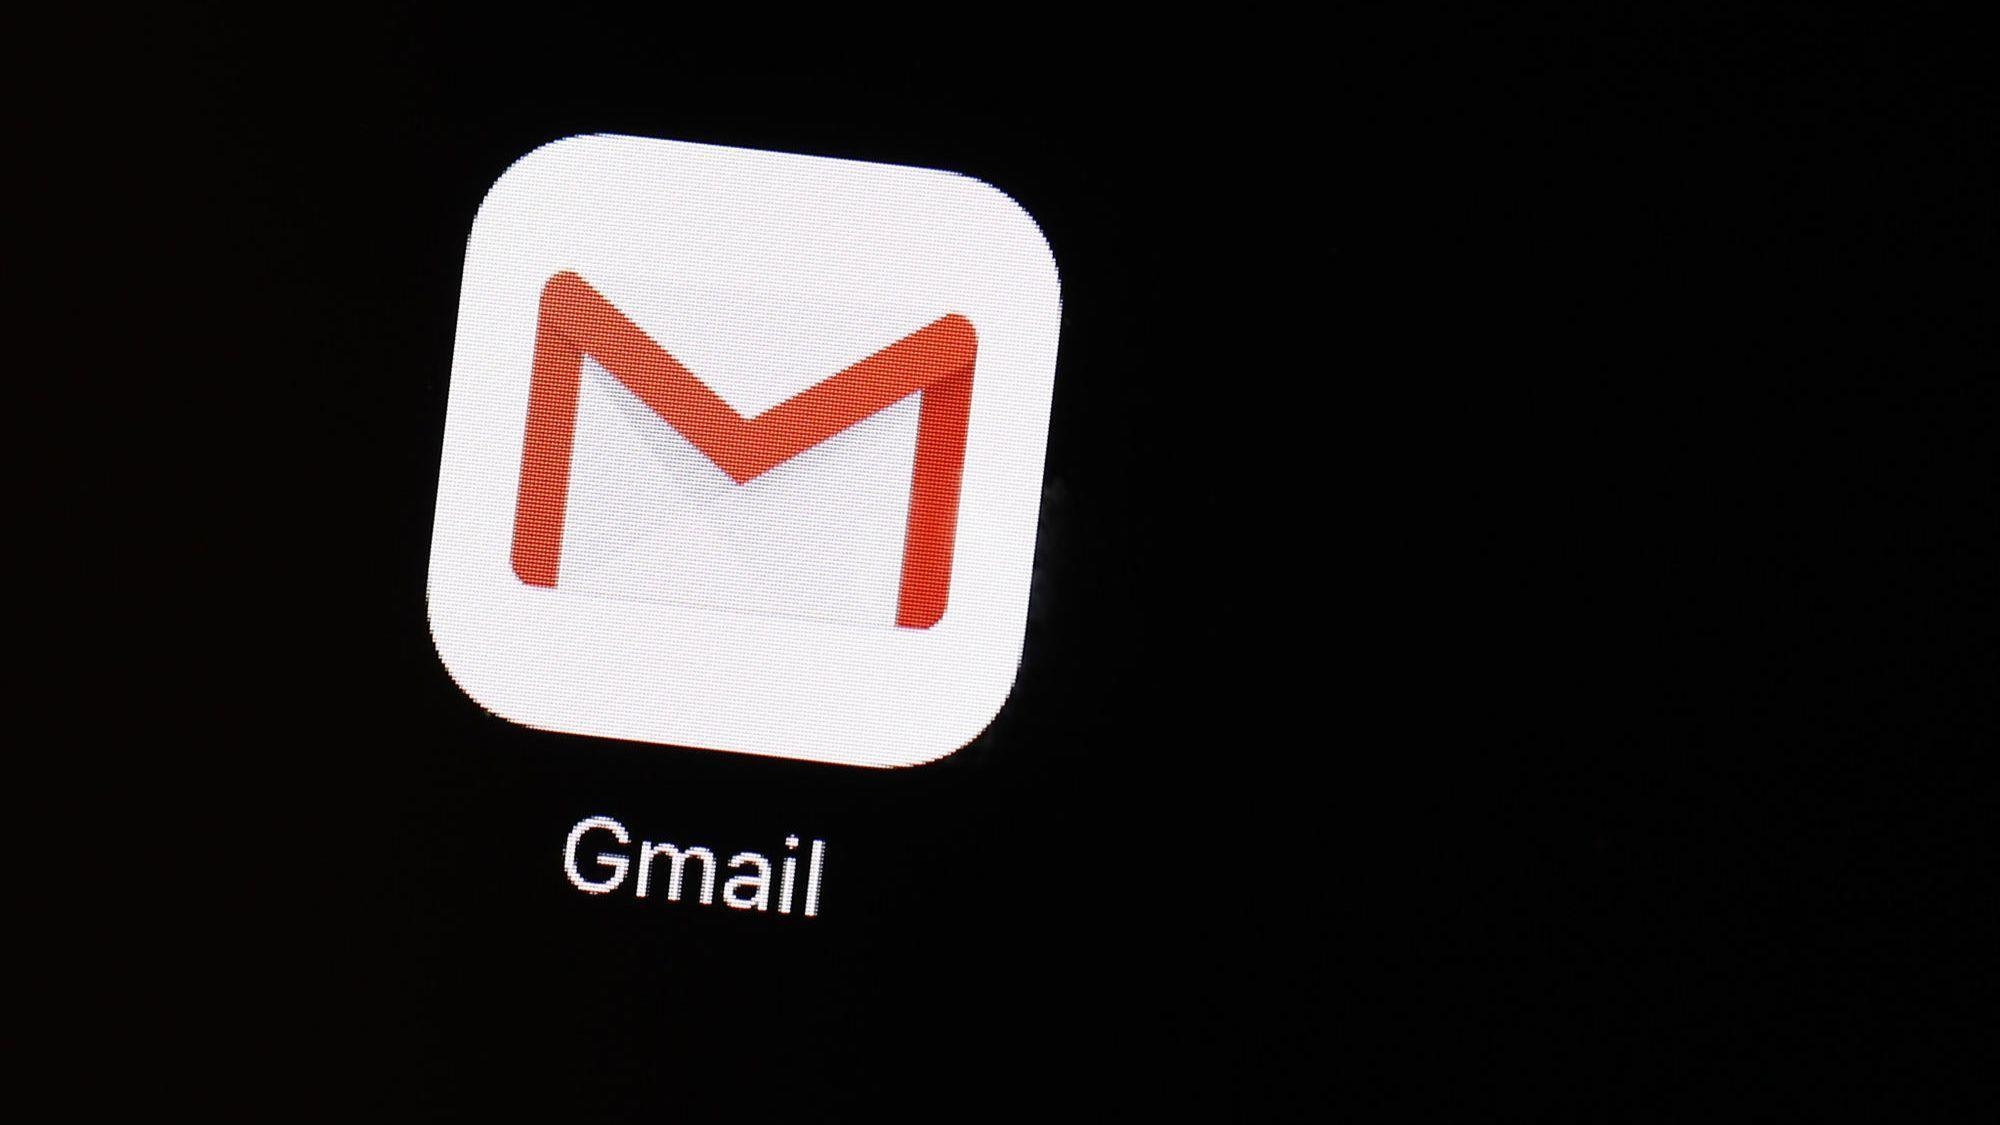 Google Restores Baltimore City Gmail Accounts It Took Down | DeviceDaily.com